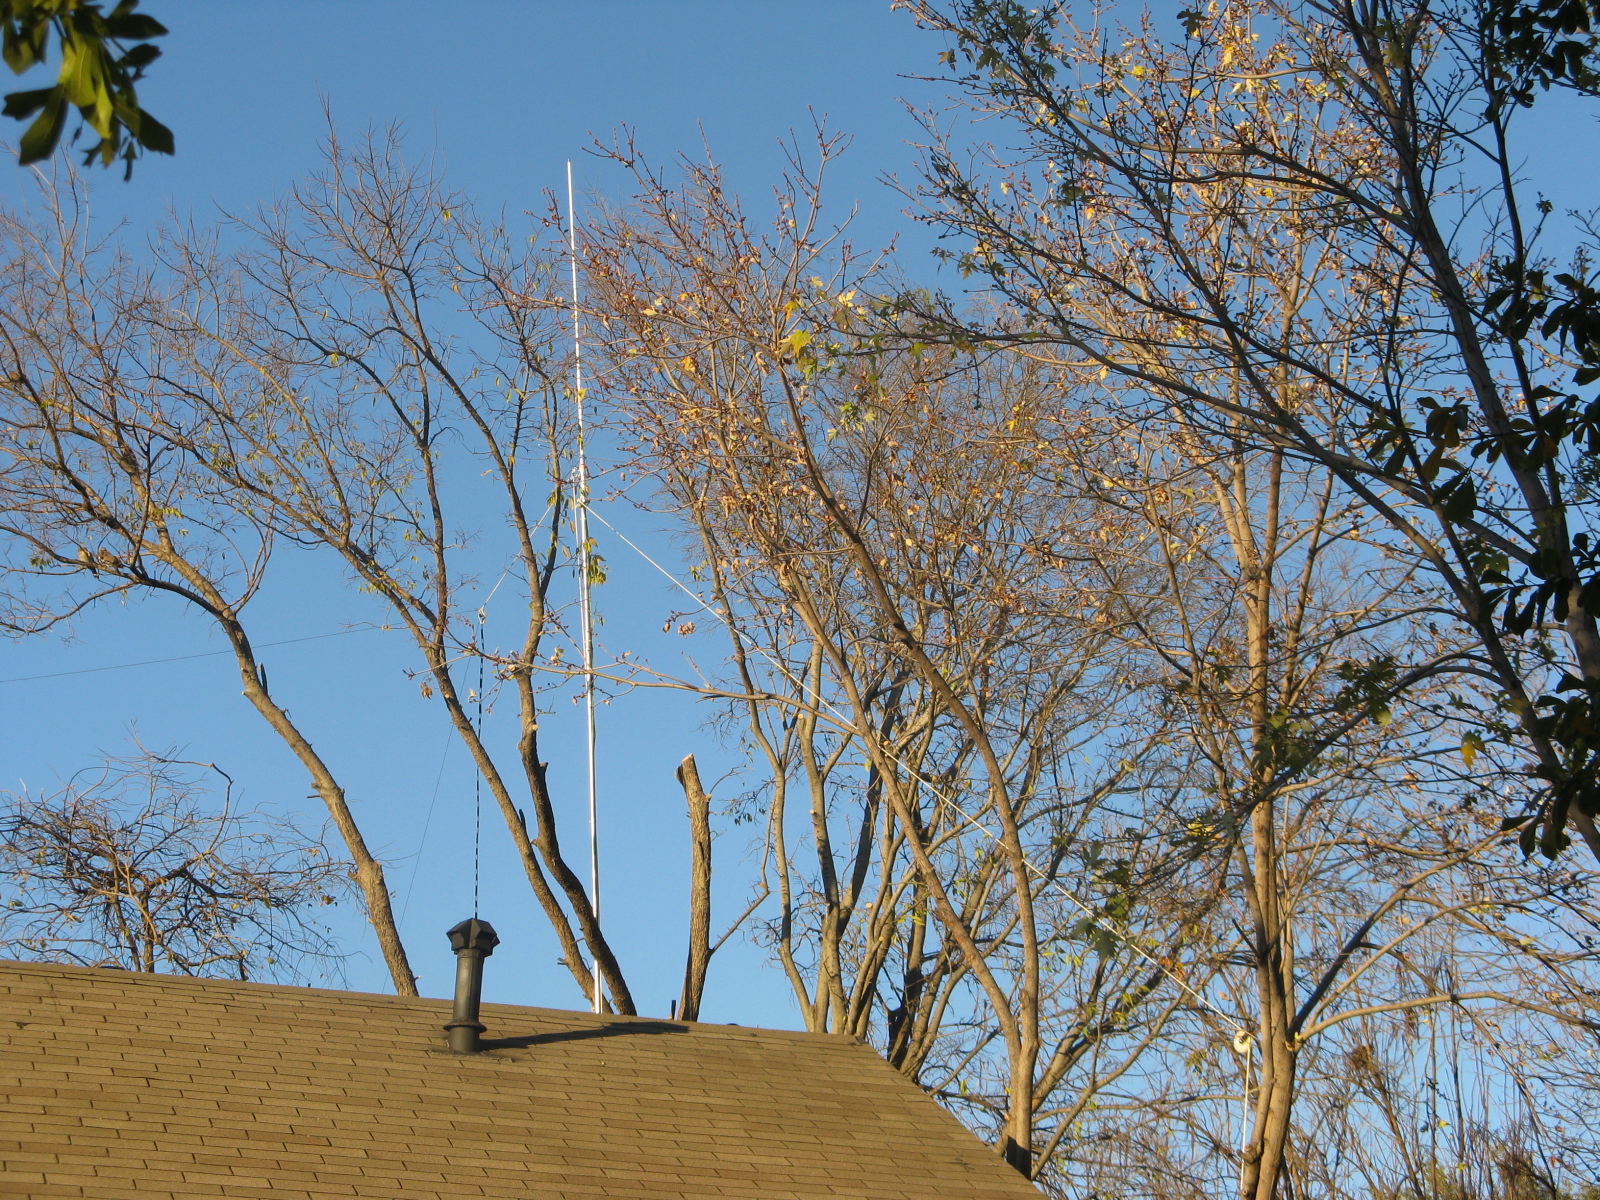 Antenna from front yard